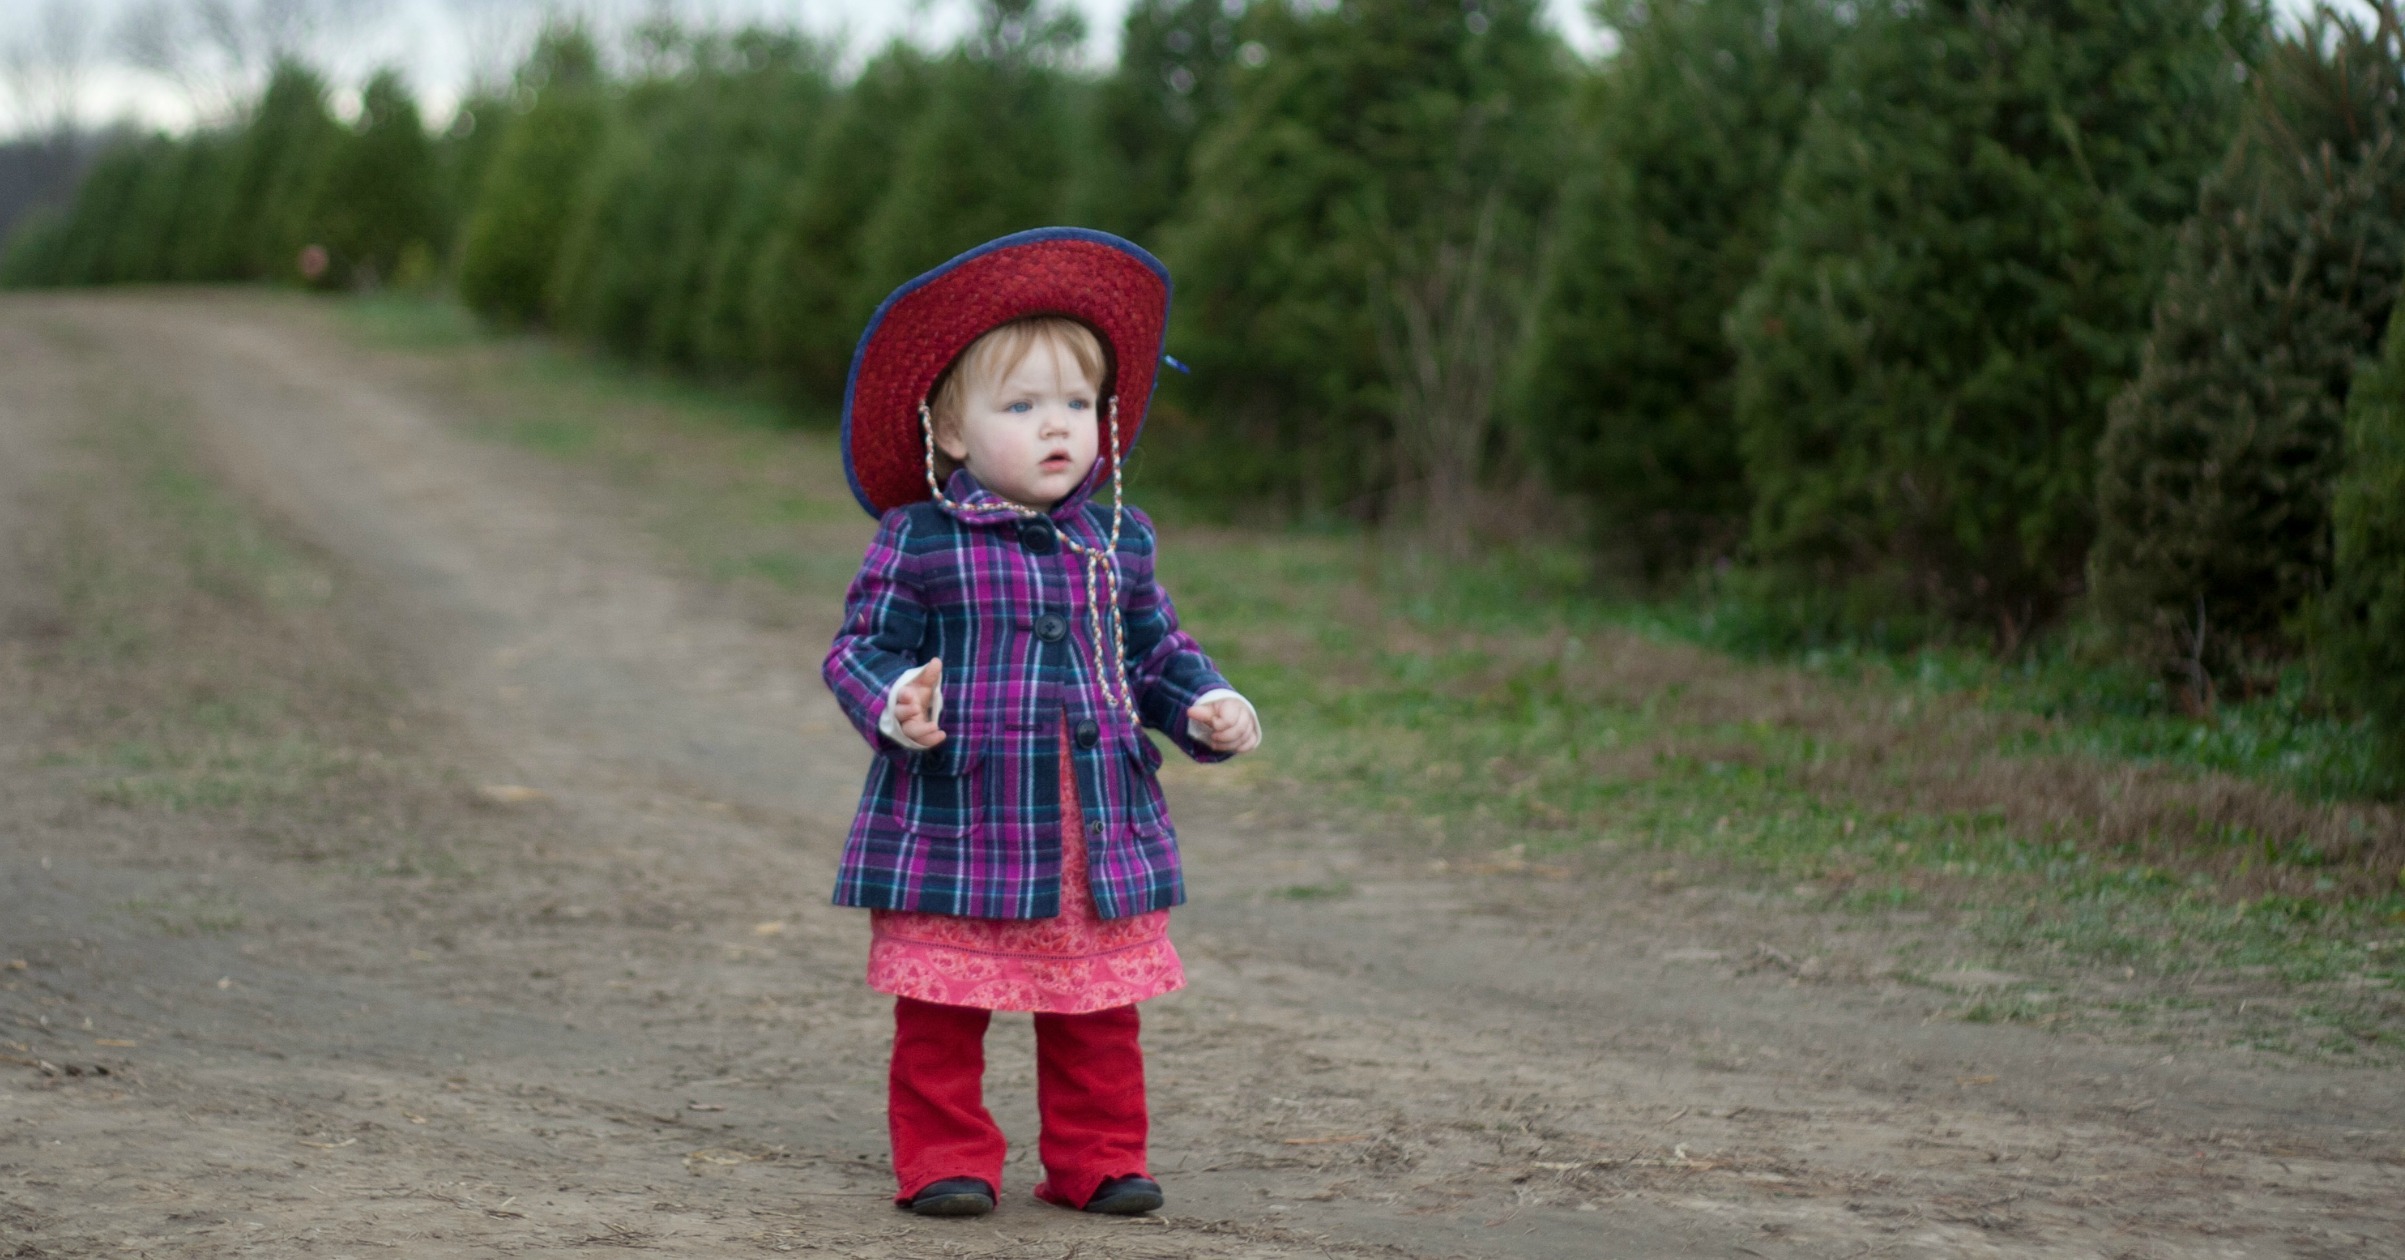 Piney Acres Christmas Tree Farm is a Beautiful Family Adventure | Indy with Kids